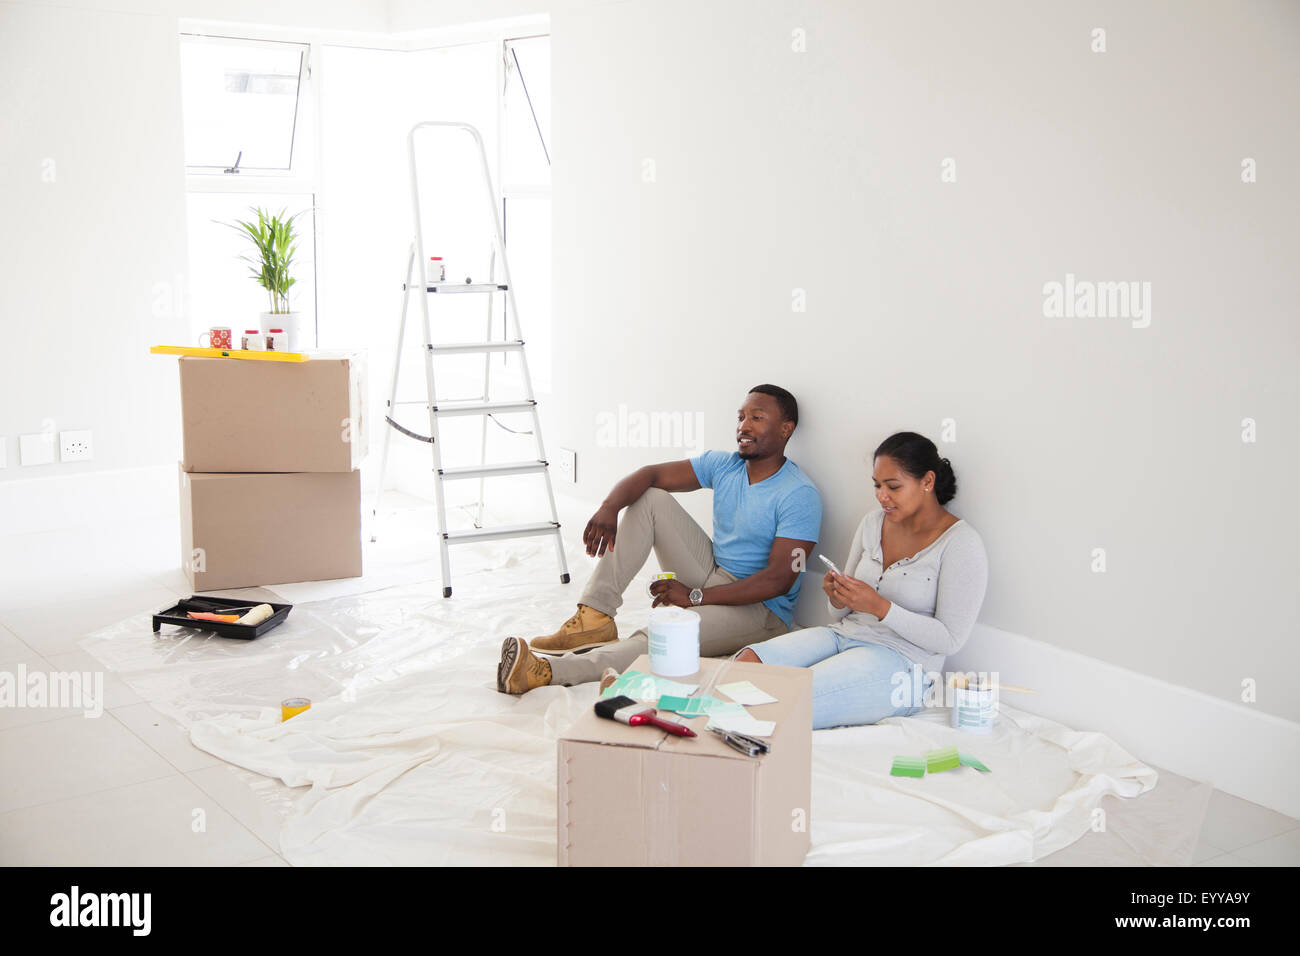 Couple relaxing in new home Stock Photo